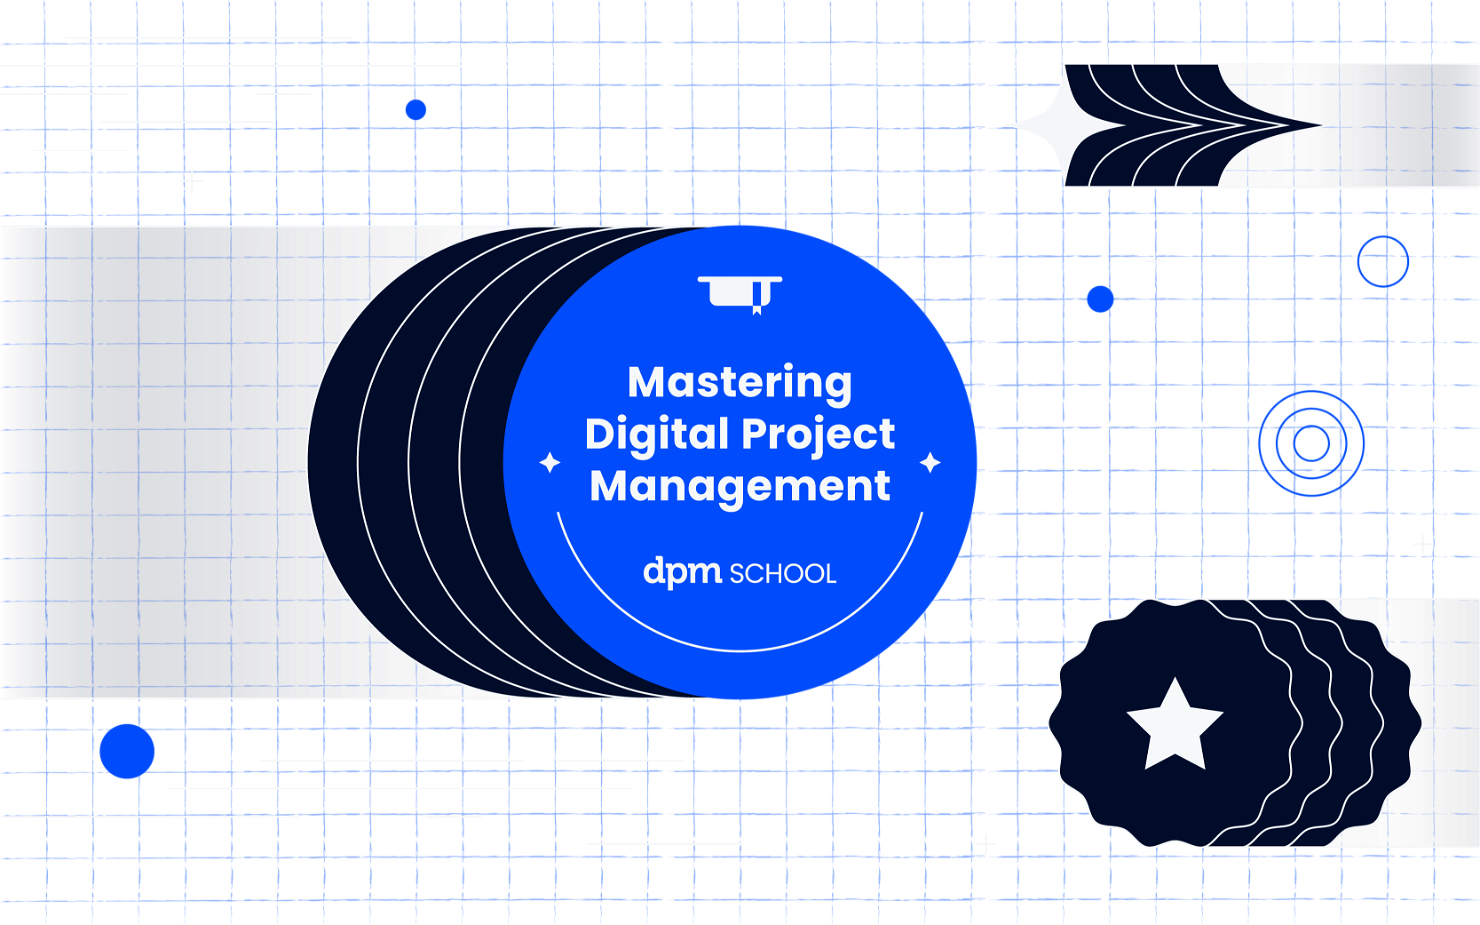 Mastering Digital Project Management from The DPM School